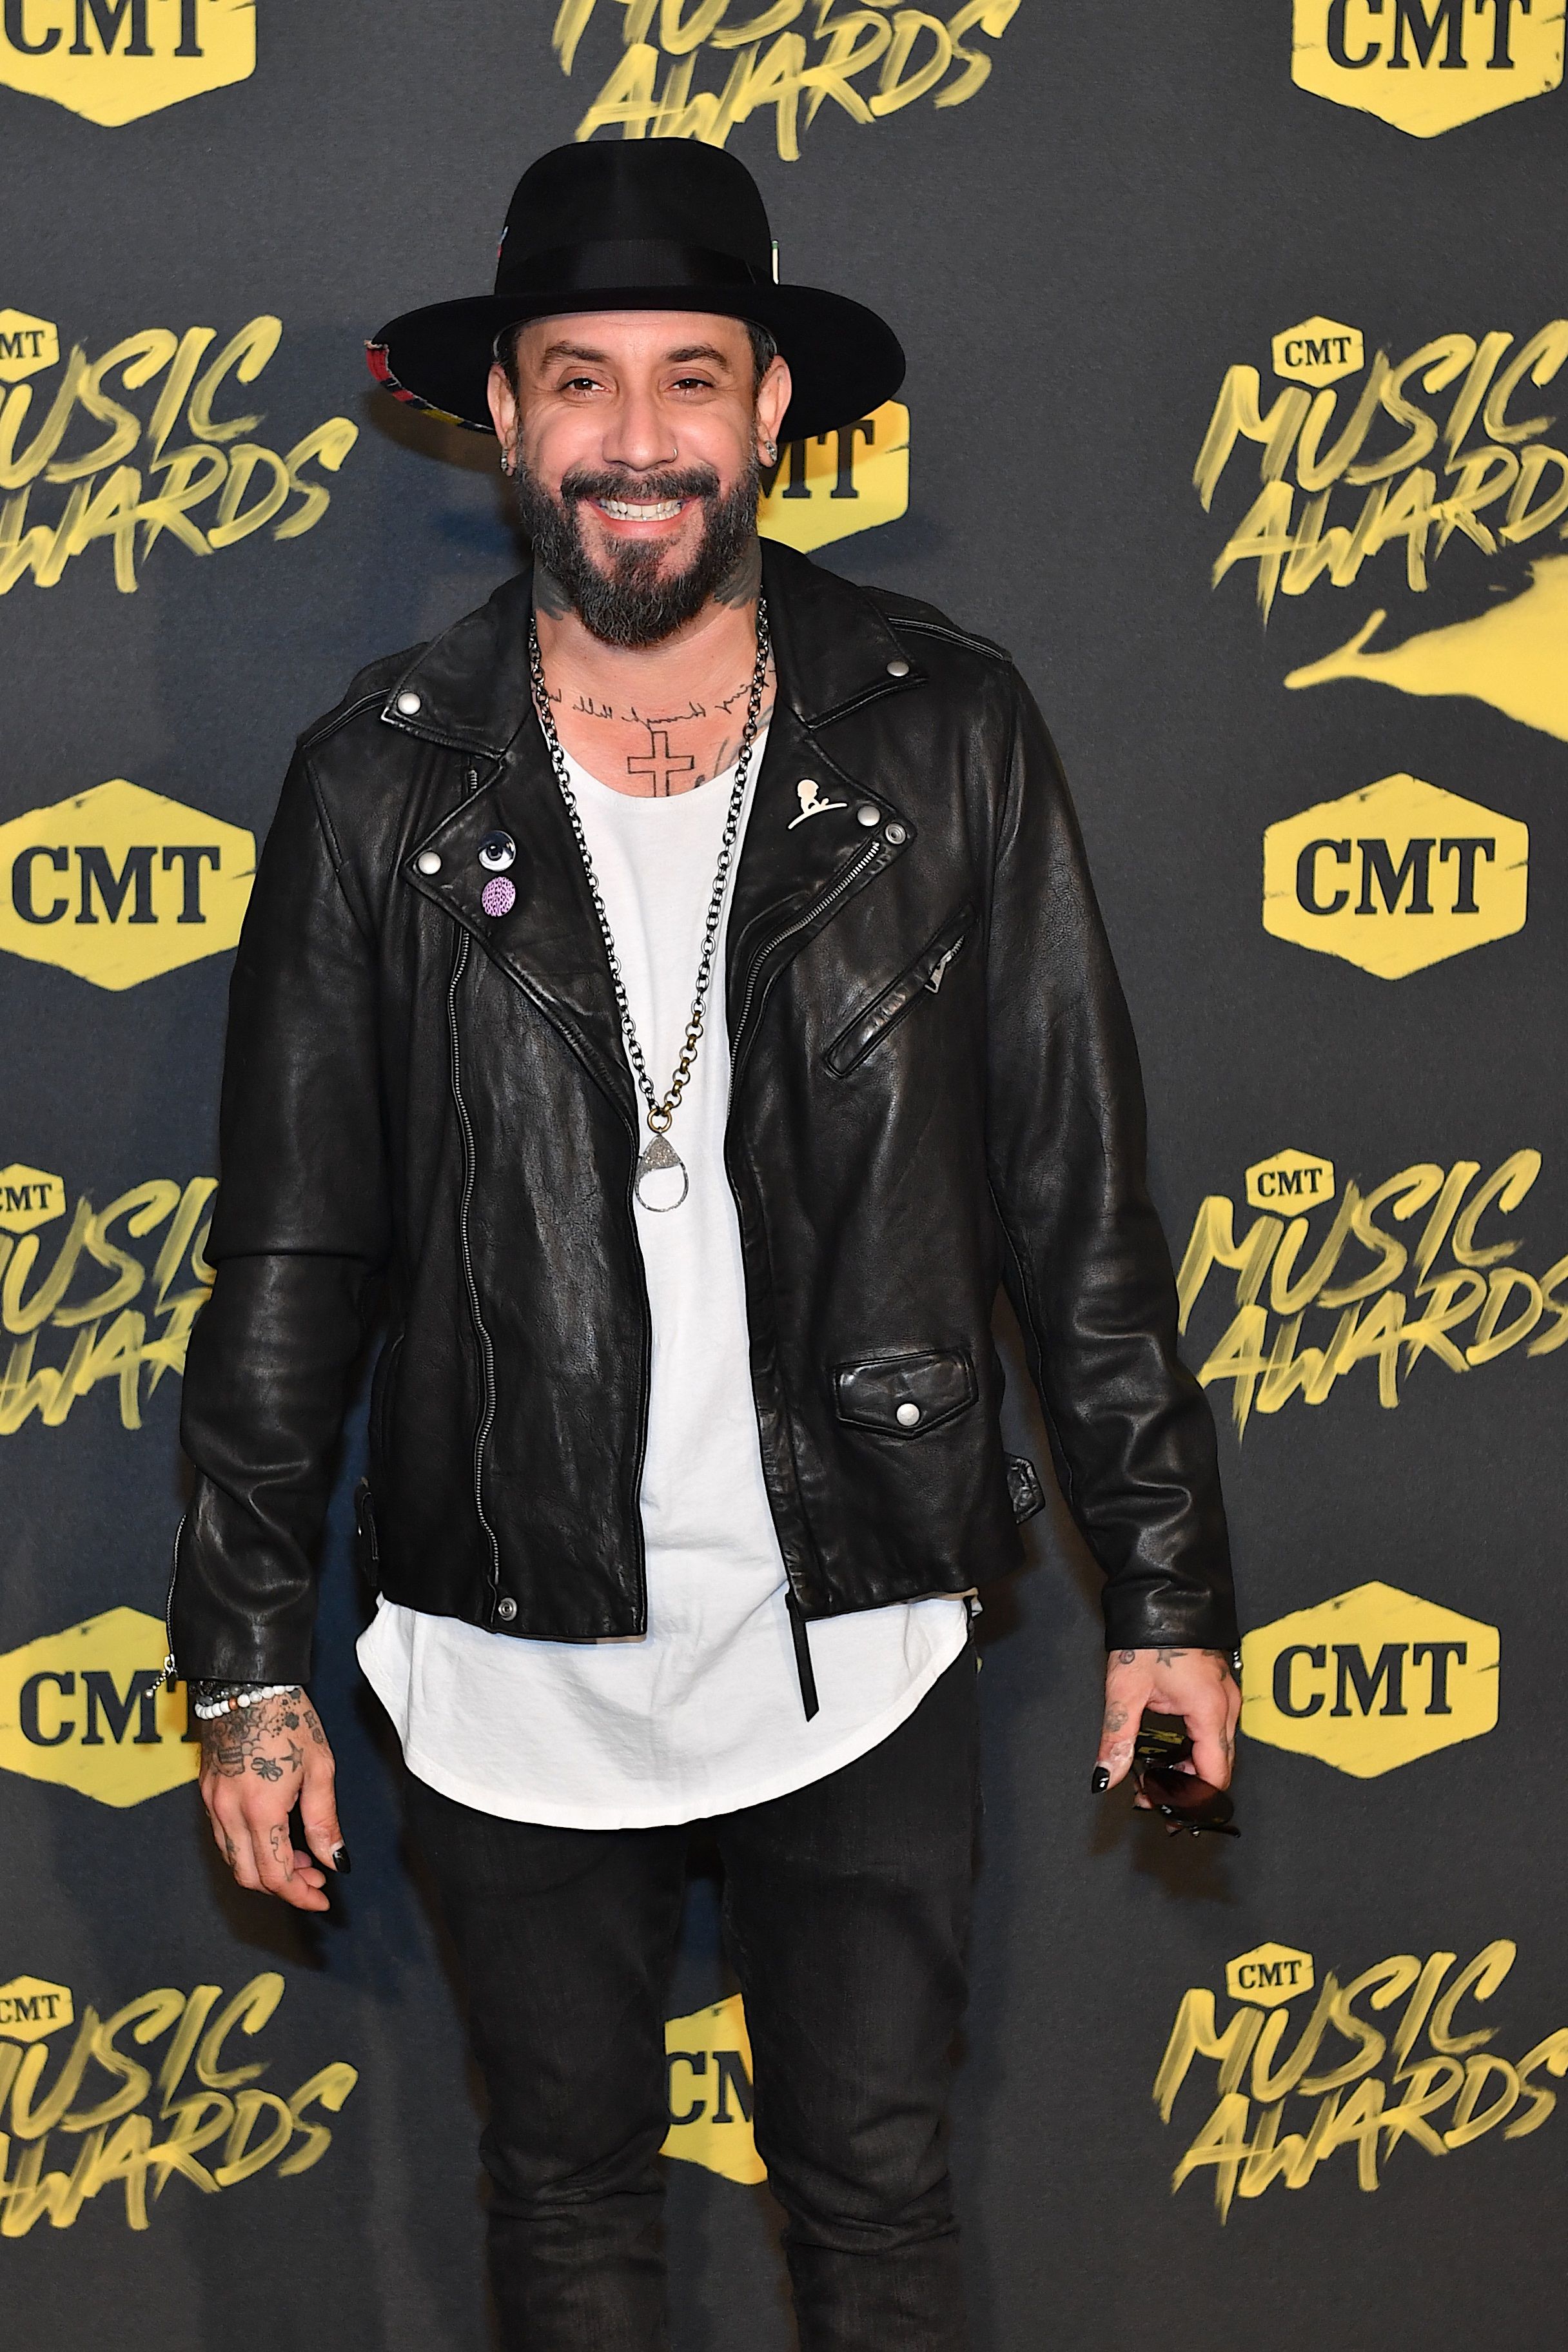 A.J. McLean at the 2018 CMT Music Awards at Bridgestone Arena on June 6, 2018 in Nashville, Tennessee. | Photo: Getty Images.